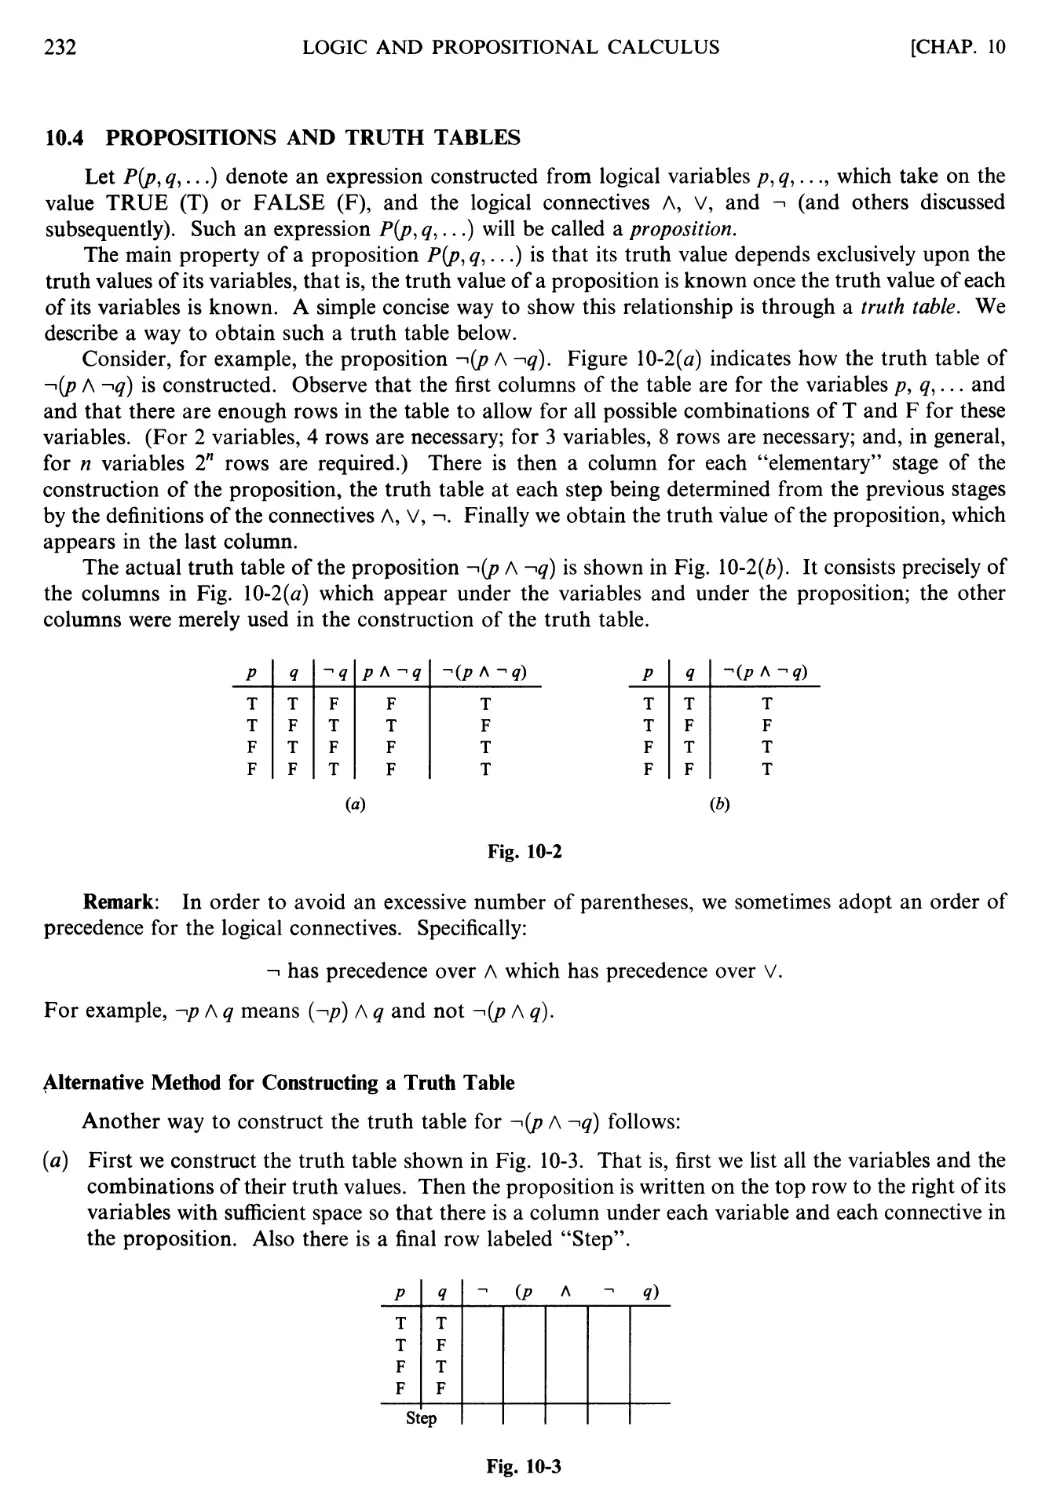 10.4 Propositions and truth tables